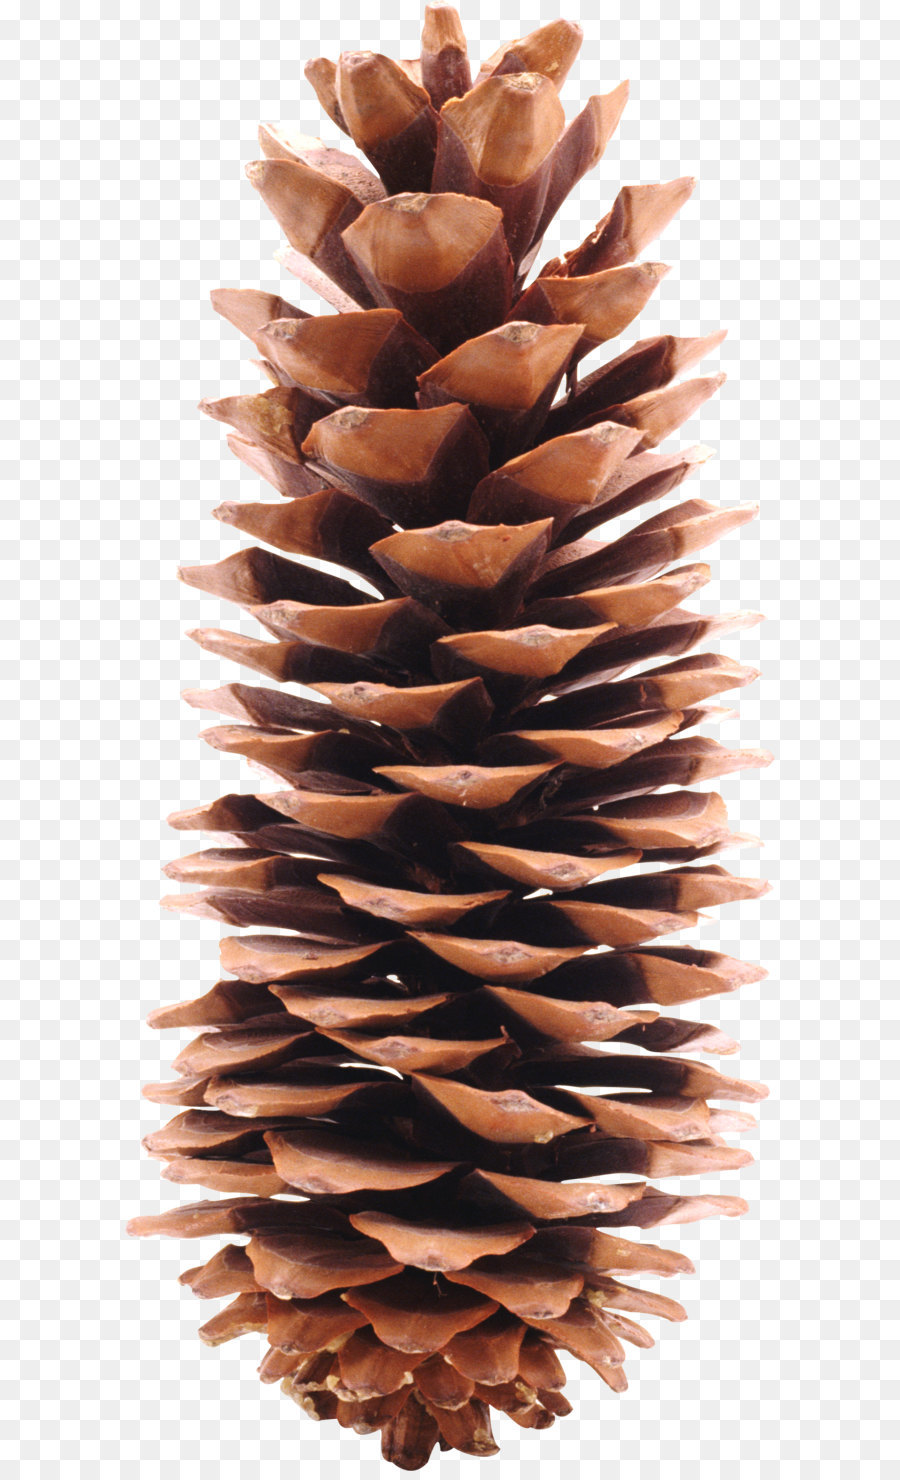 Grand Theft Auto V Conifer cone Coub Website YouTube - Pine cone PNG png download - 1327*3004 - Free Transparent Pine png Download.